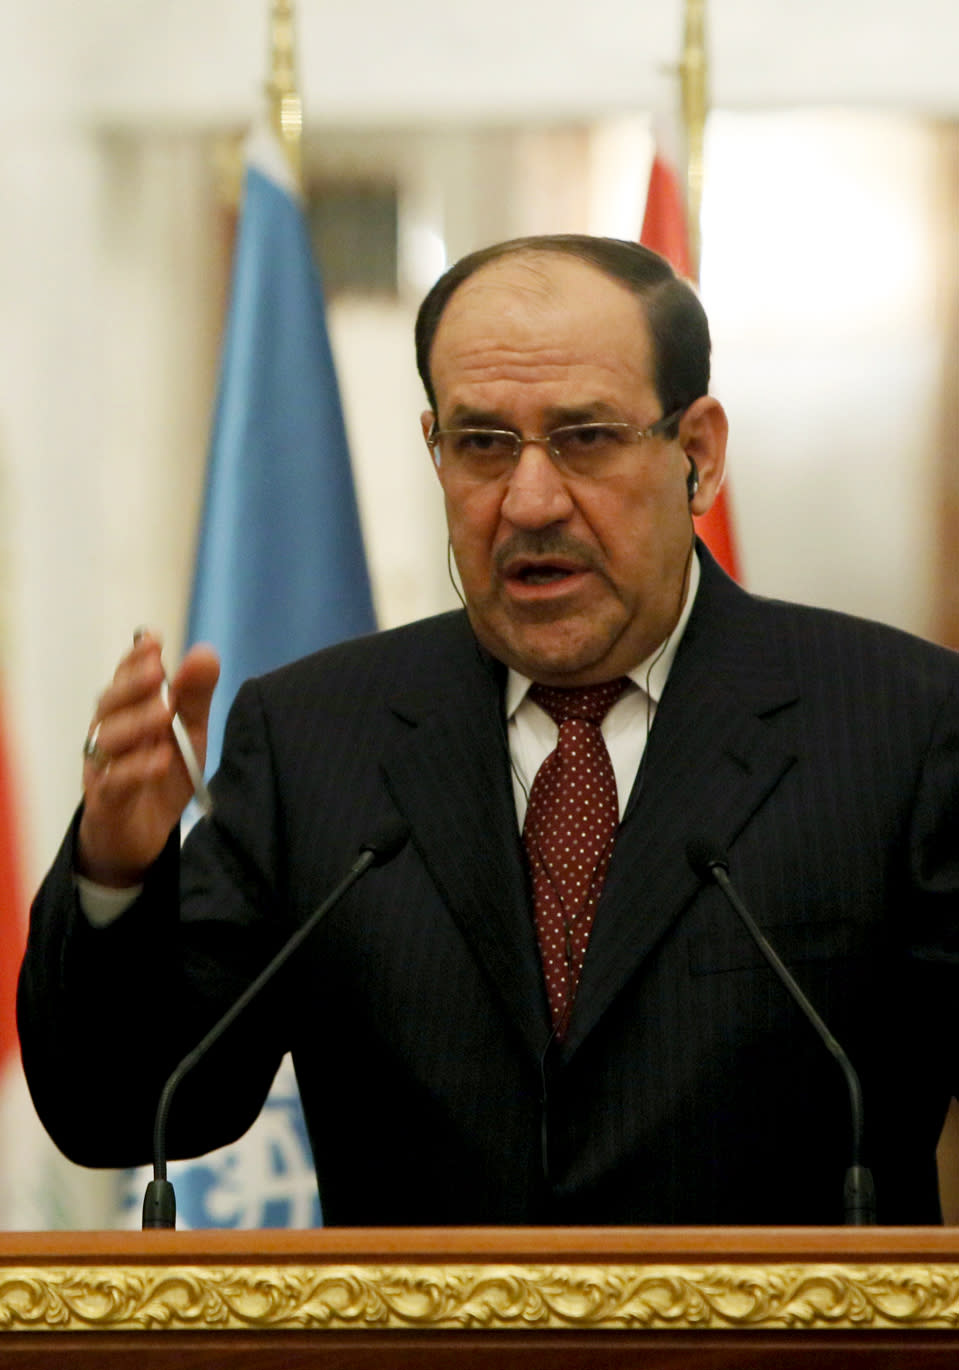 Iraqi Prime Minister Nouri al-Maliki gives a joint press conference with United Nations Secretary-General Ban Ki-Moon during Ki-moon's two day visit to Baghdad, Iraq, Jan. 13, 2014. The U.N. chief expressed deep concerns Monday over the deteriorating security situation in Iraq as an unprecedented standoff is underway between Iraqi troops and al-Qaida-linked militants in western Anbar province. Ki-moon made his comments during a joint a press conference with the Iraqi Prime Minister, Nouri al-Mailiki. (AP Photo/Ali Al-Saadi, Pool)